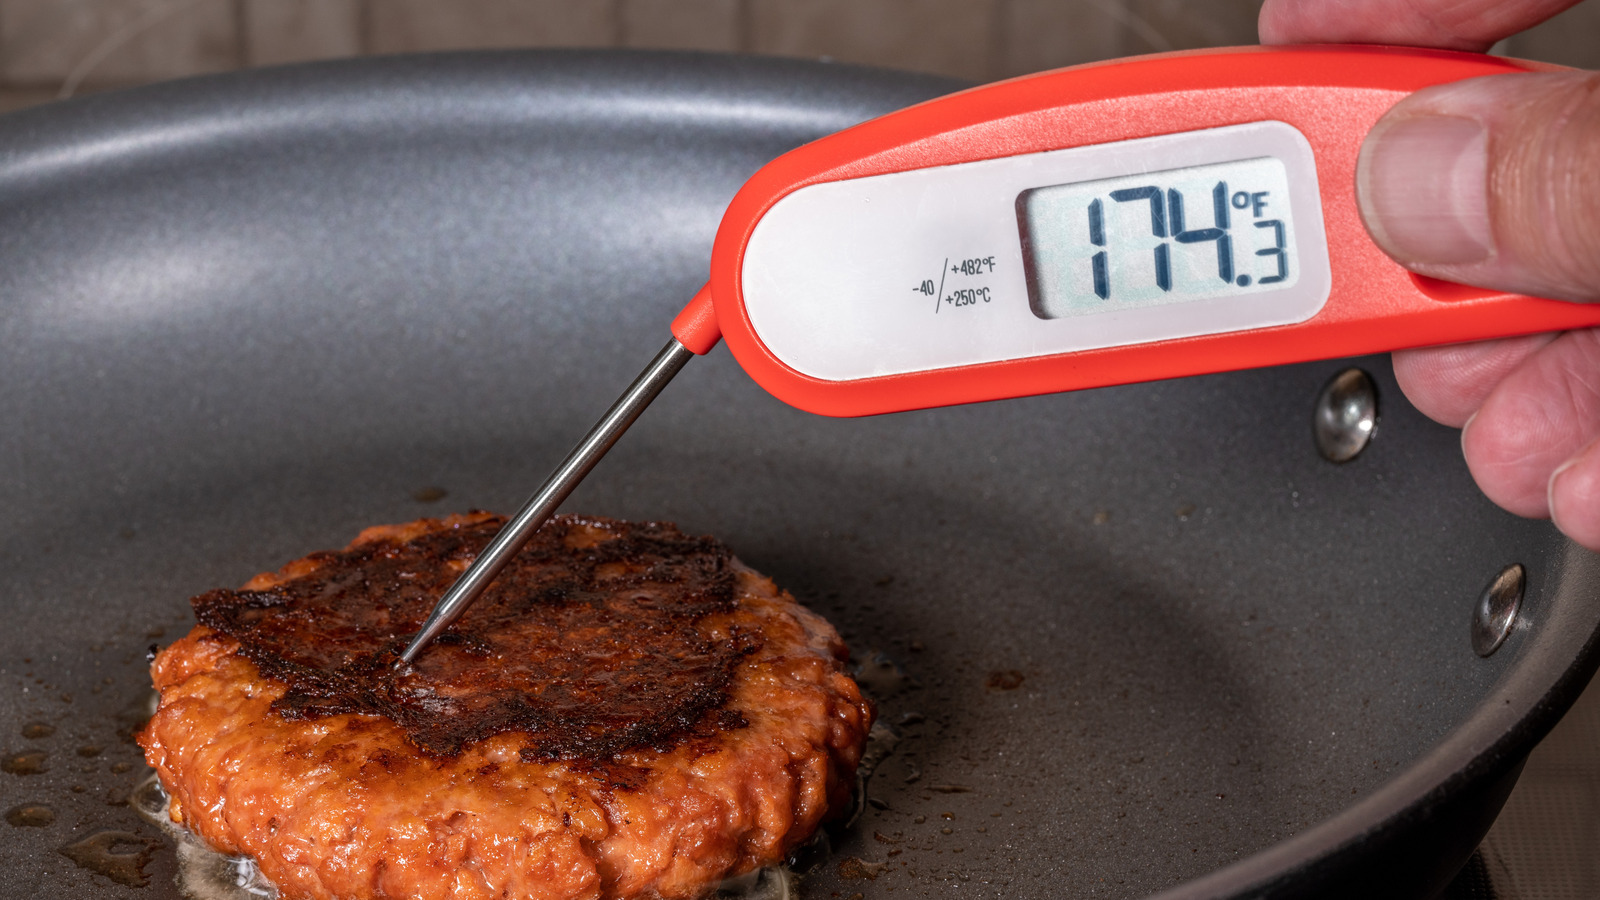 Use an Instant-Read Thermometer, Steak